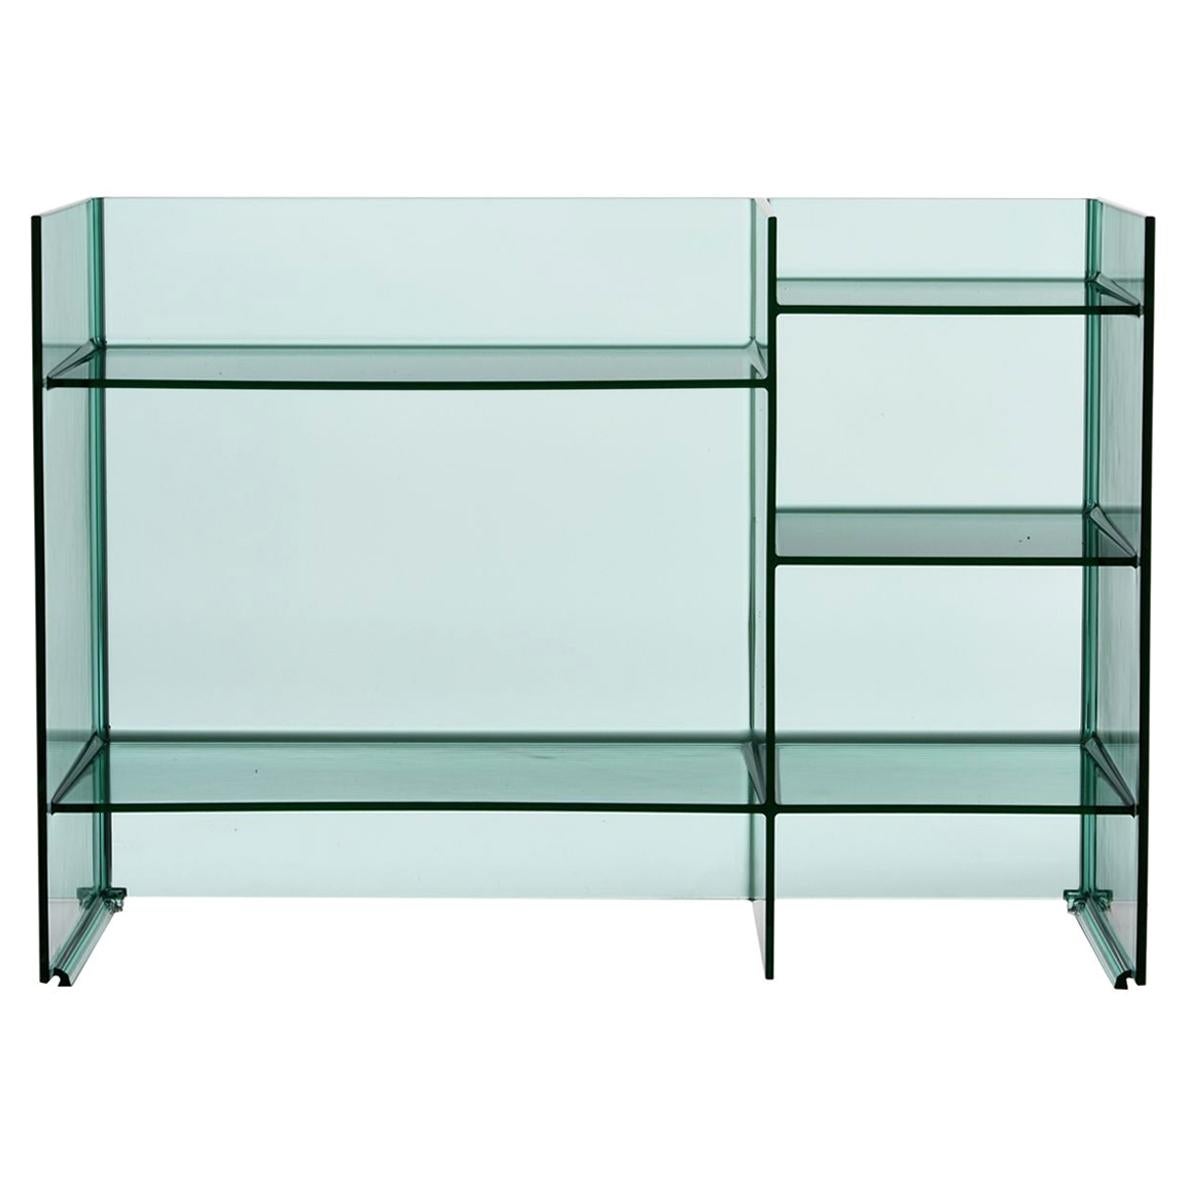 Kartell Sound Rack Modular Bookcase in Marine by Ludovica and Roberto Palomba For Sale